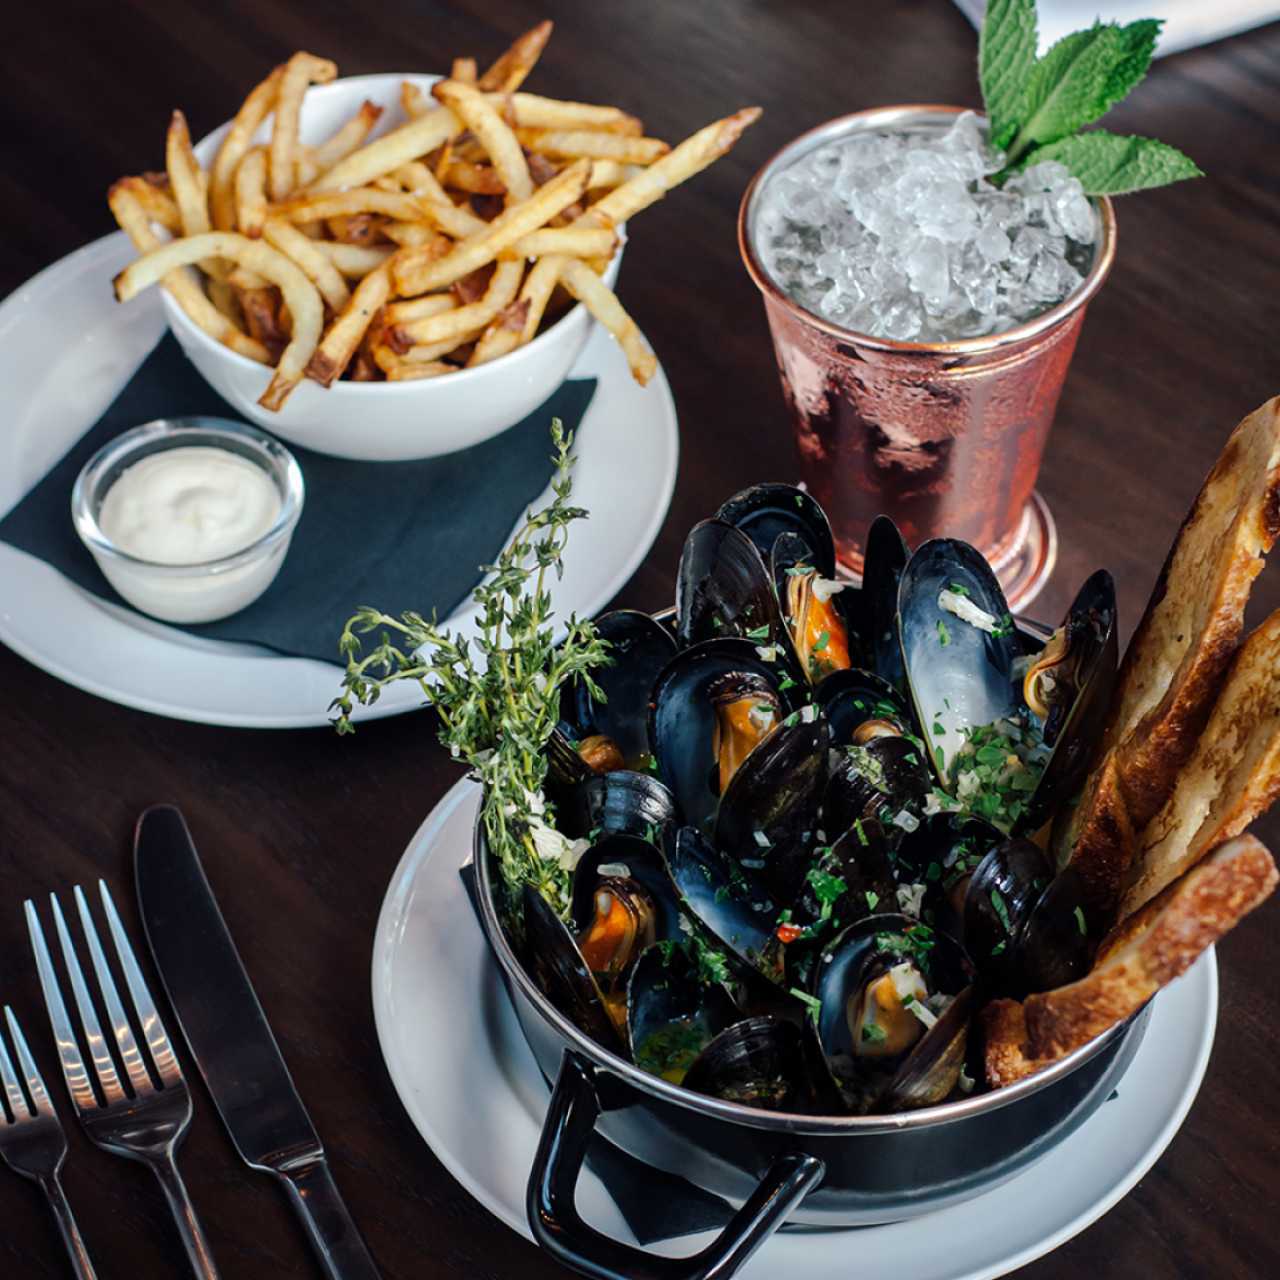 Win dinner and drinks at Pink Sky | Mussels and fries at Pink Sky